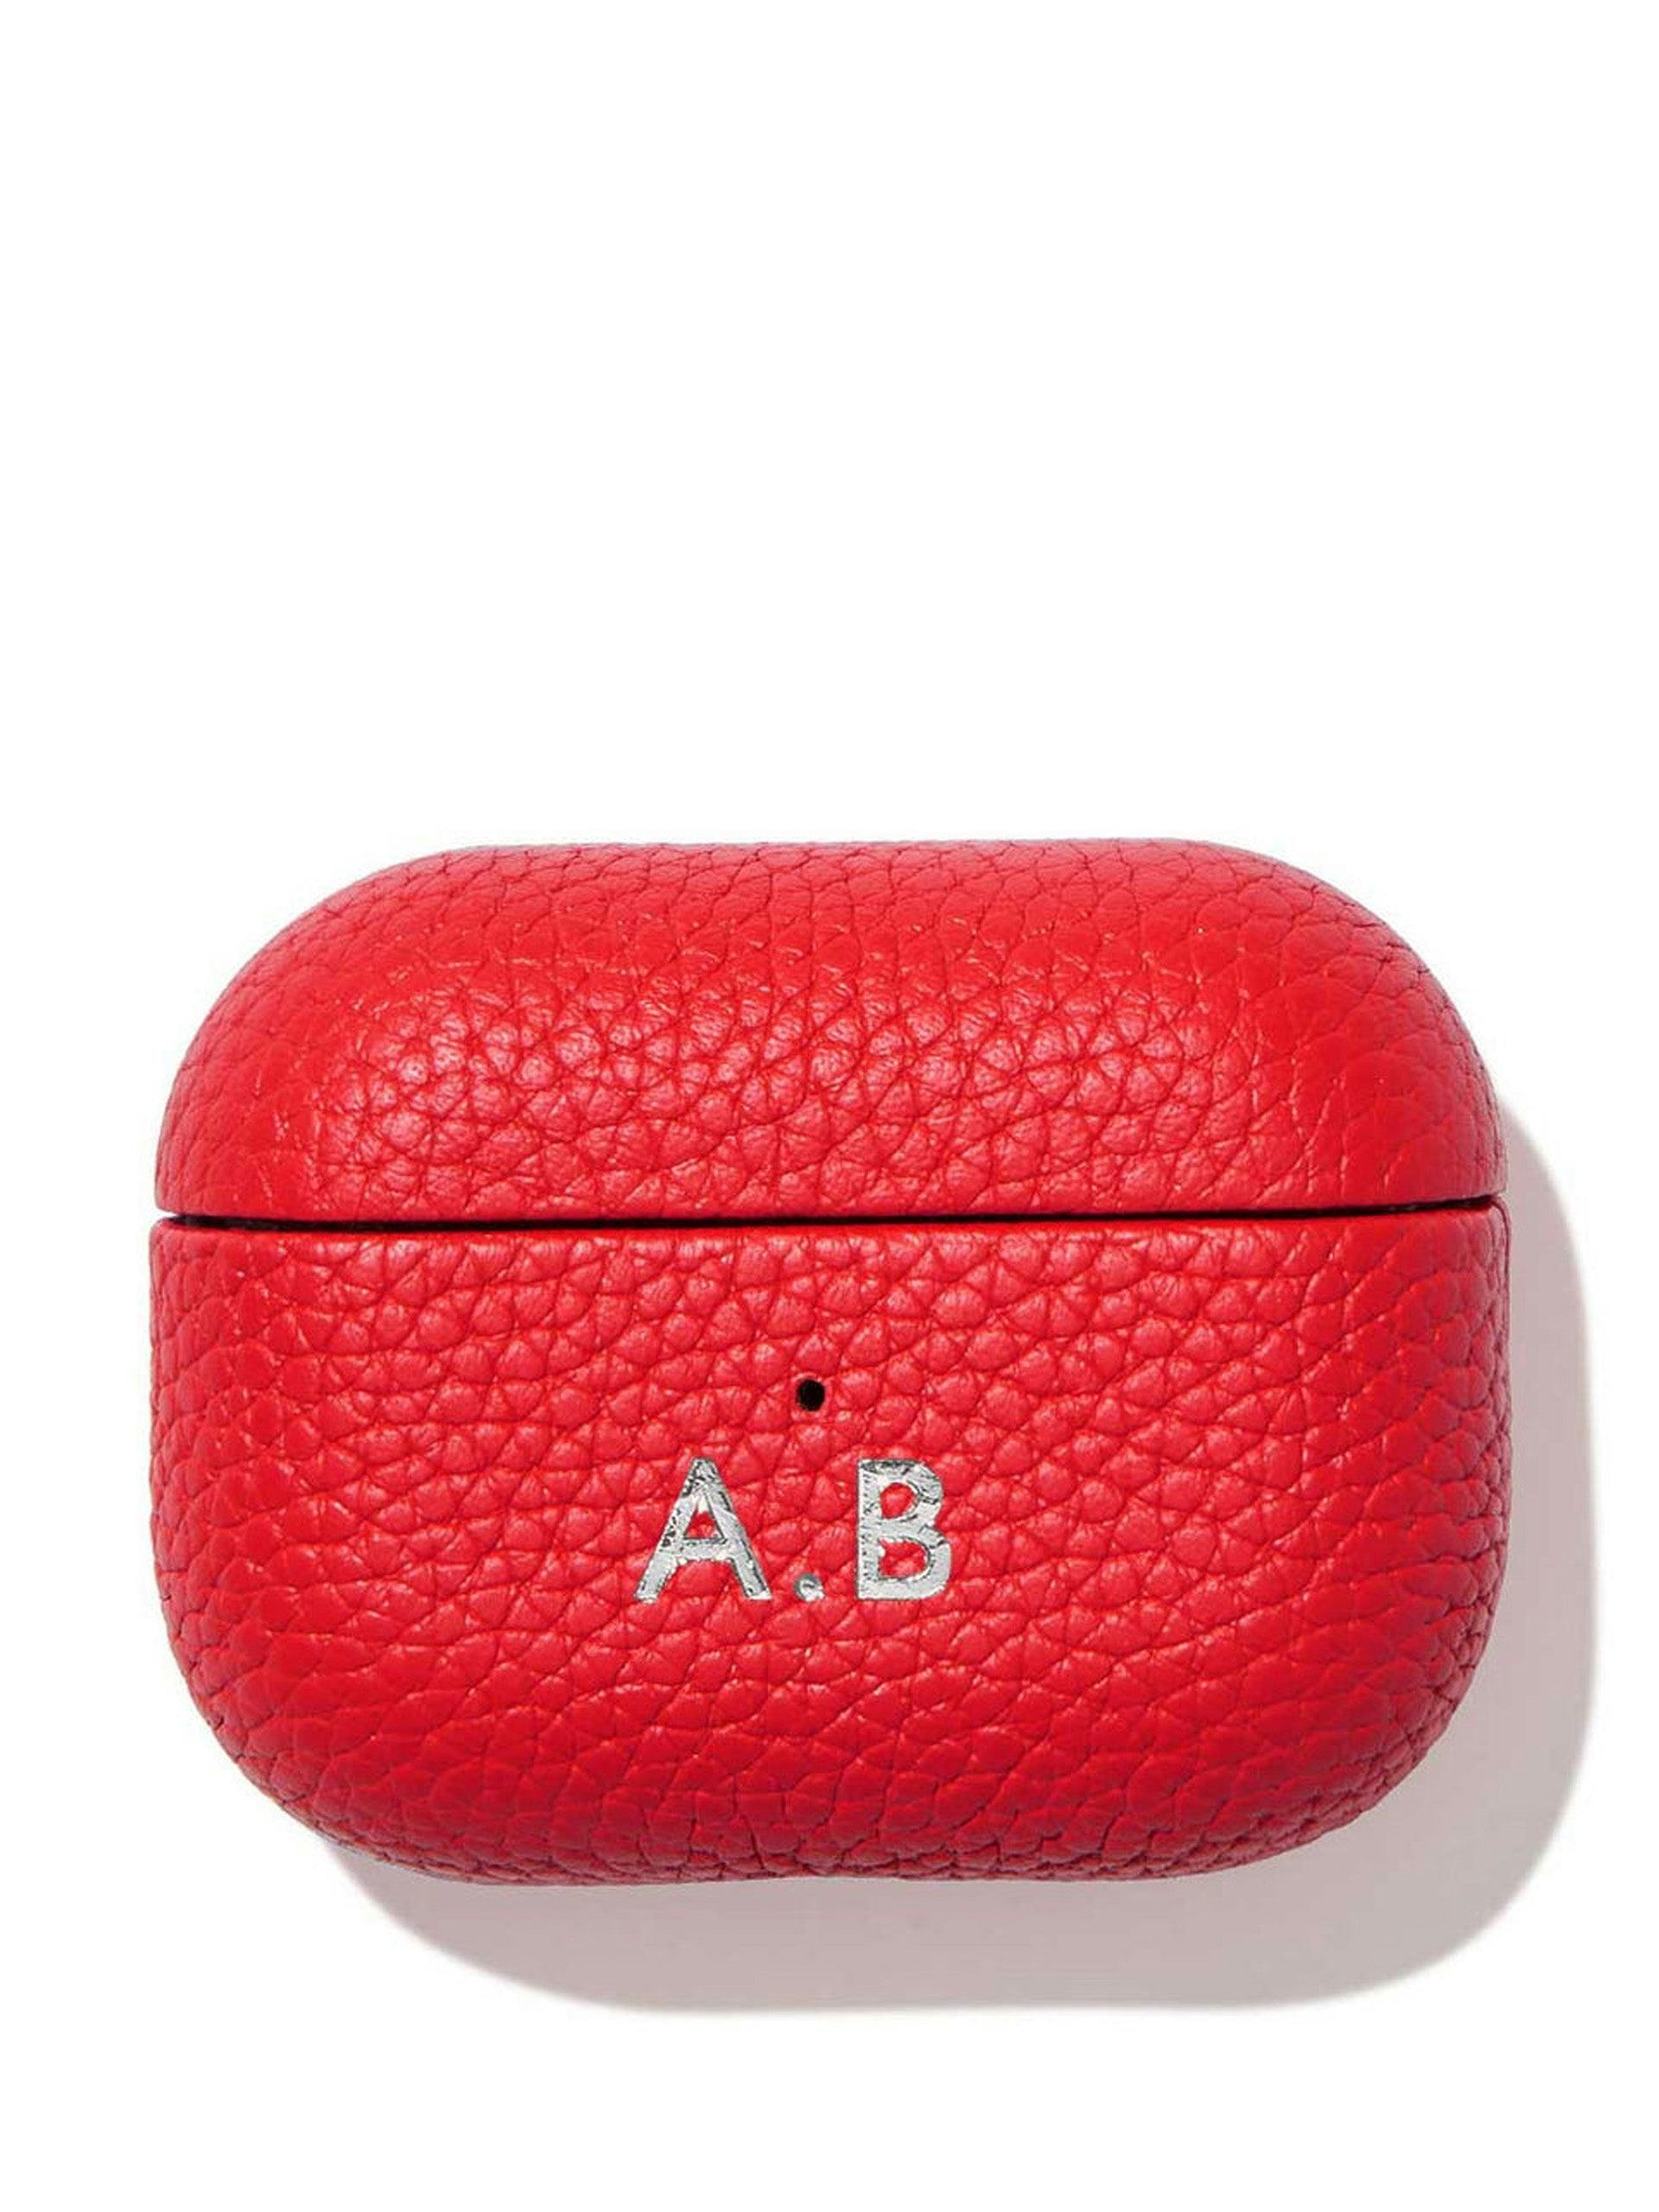 Personalised leather AirPods case